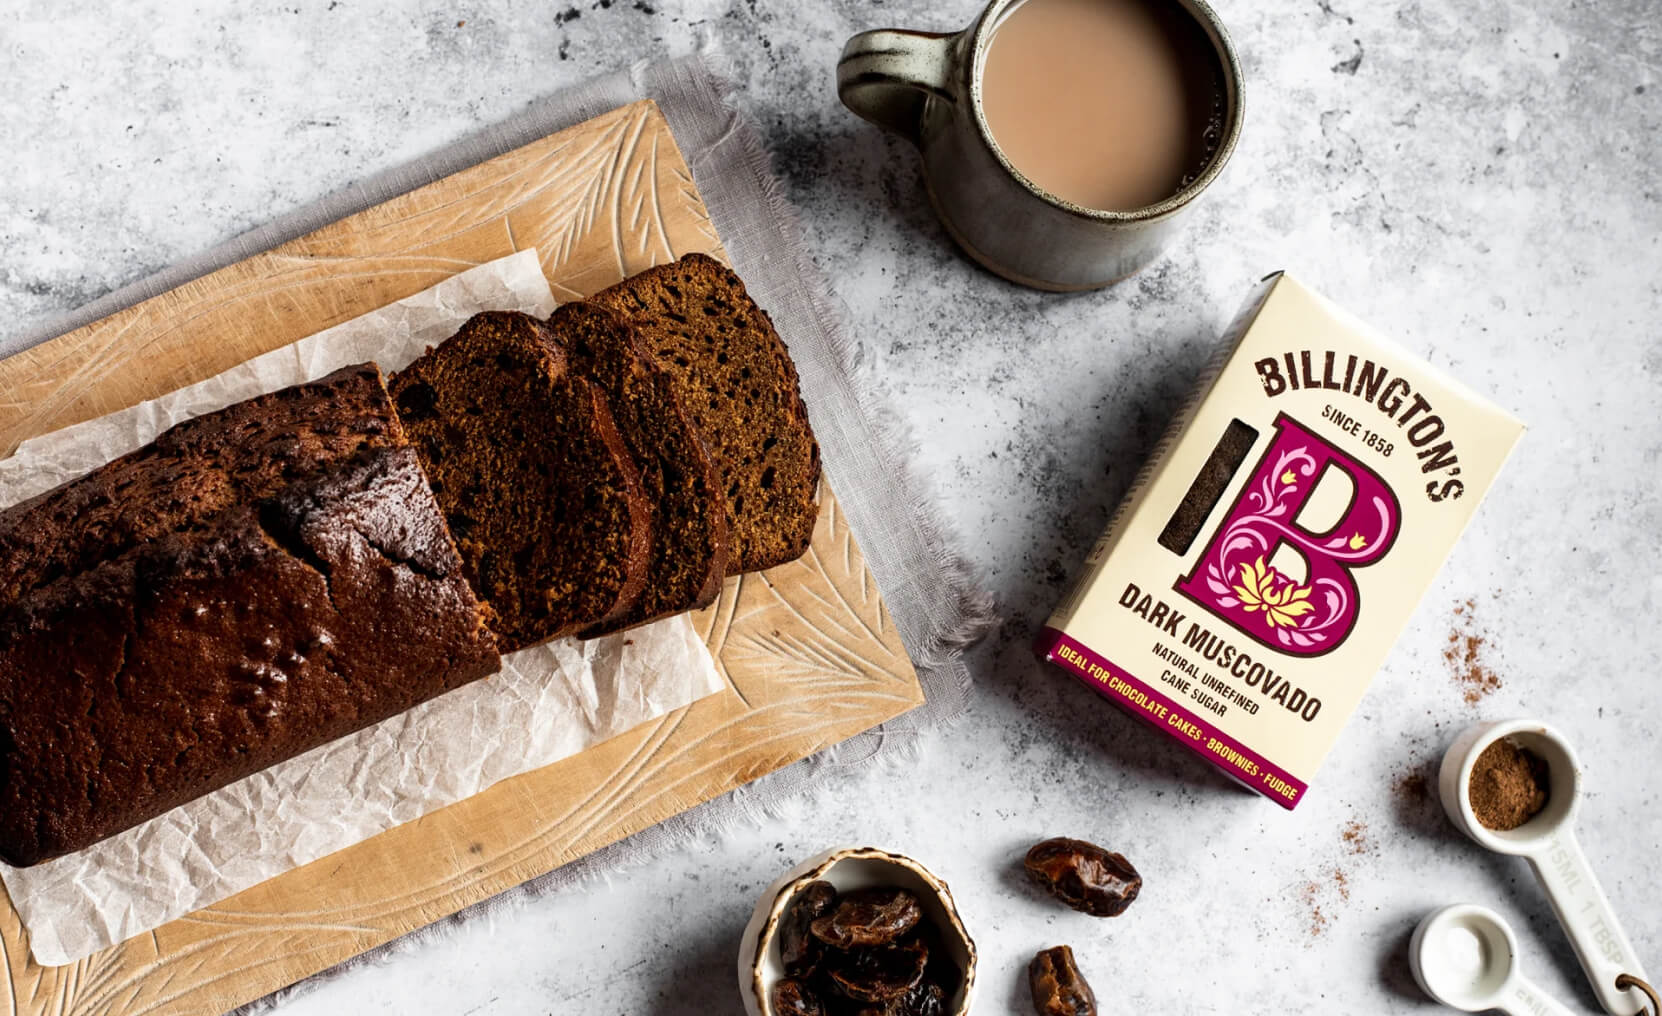 A sliced loaf cake and a coffee on a tabletop, with baking ingredients nearby, including Billington's Dark Muscovado Sugar.